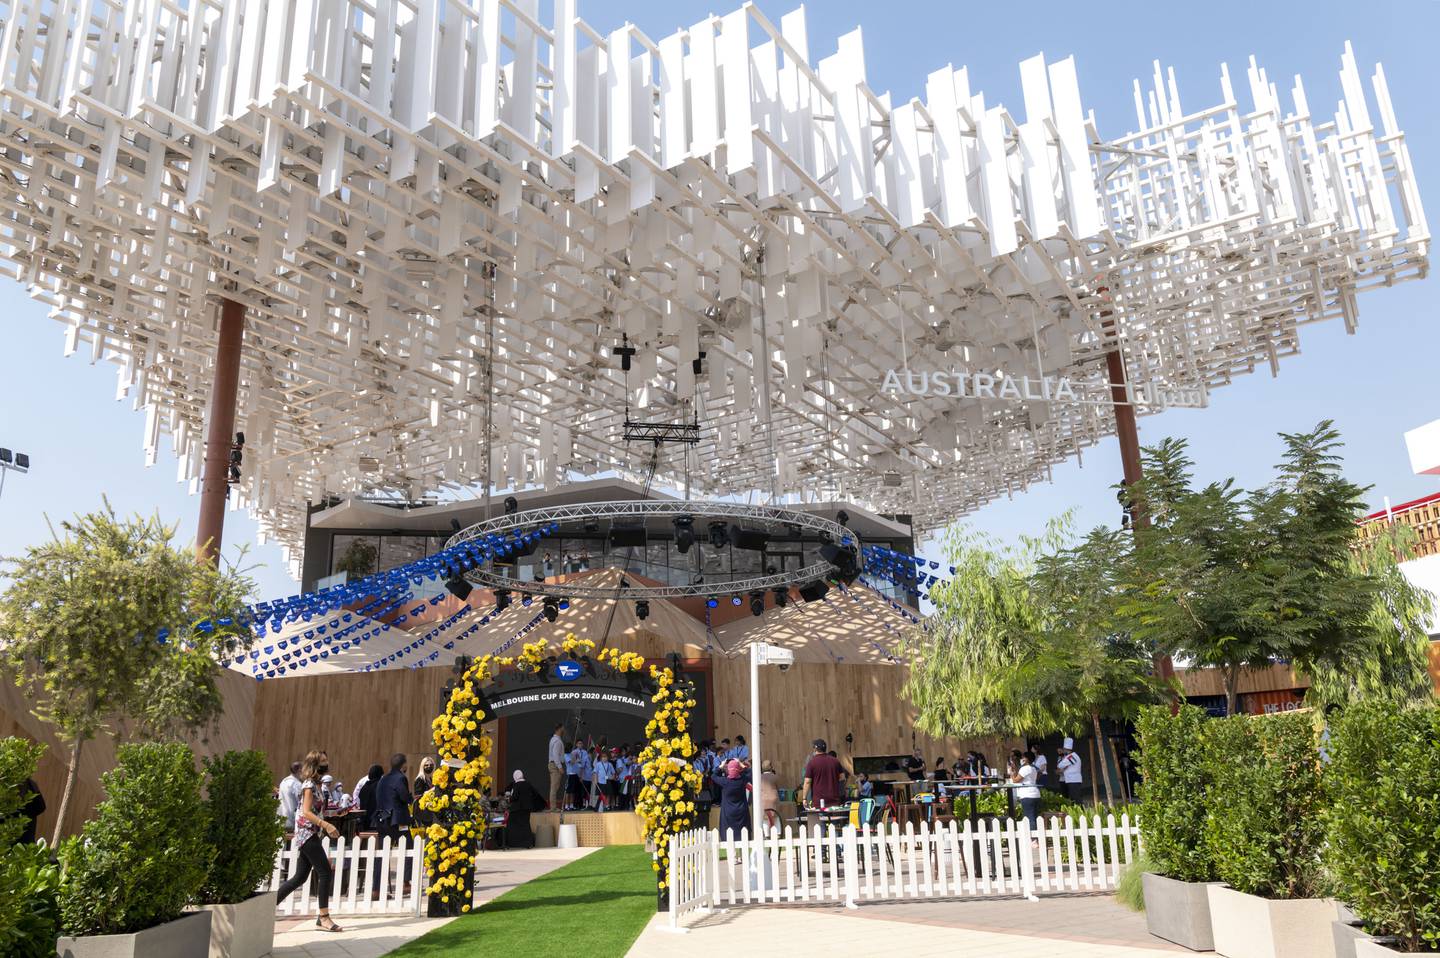 Australia's pavilion at Expo is the most popular among virtual visitors. Photo: Wam 